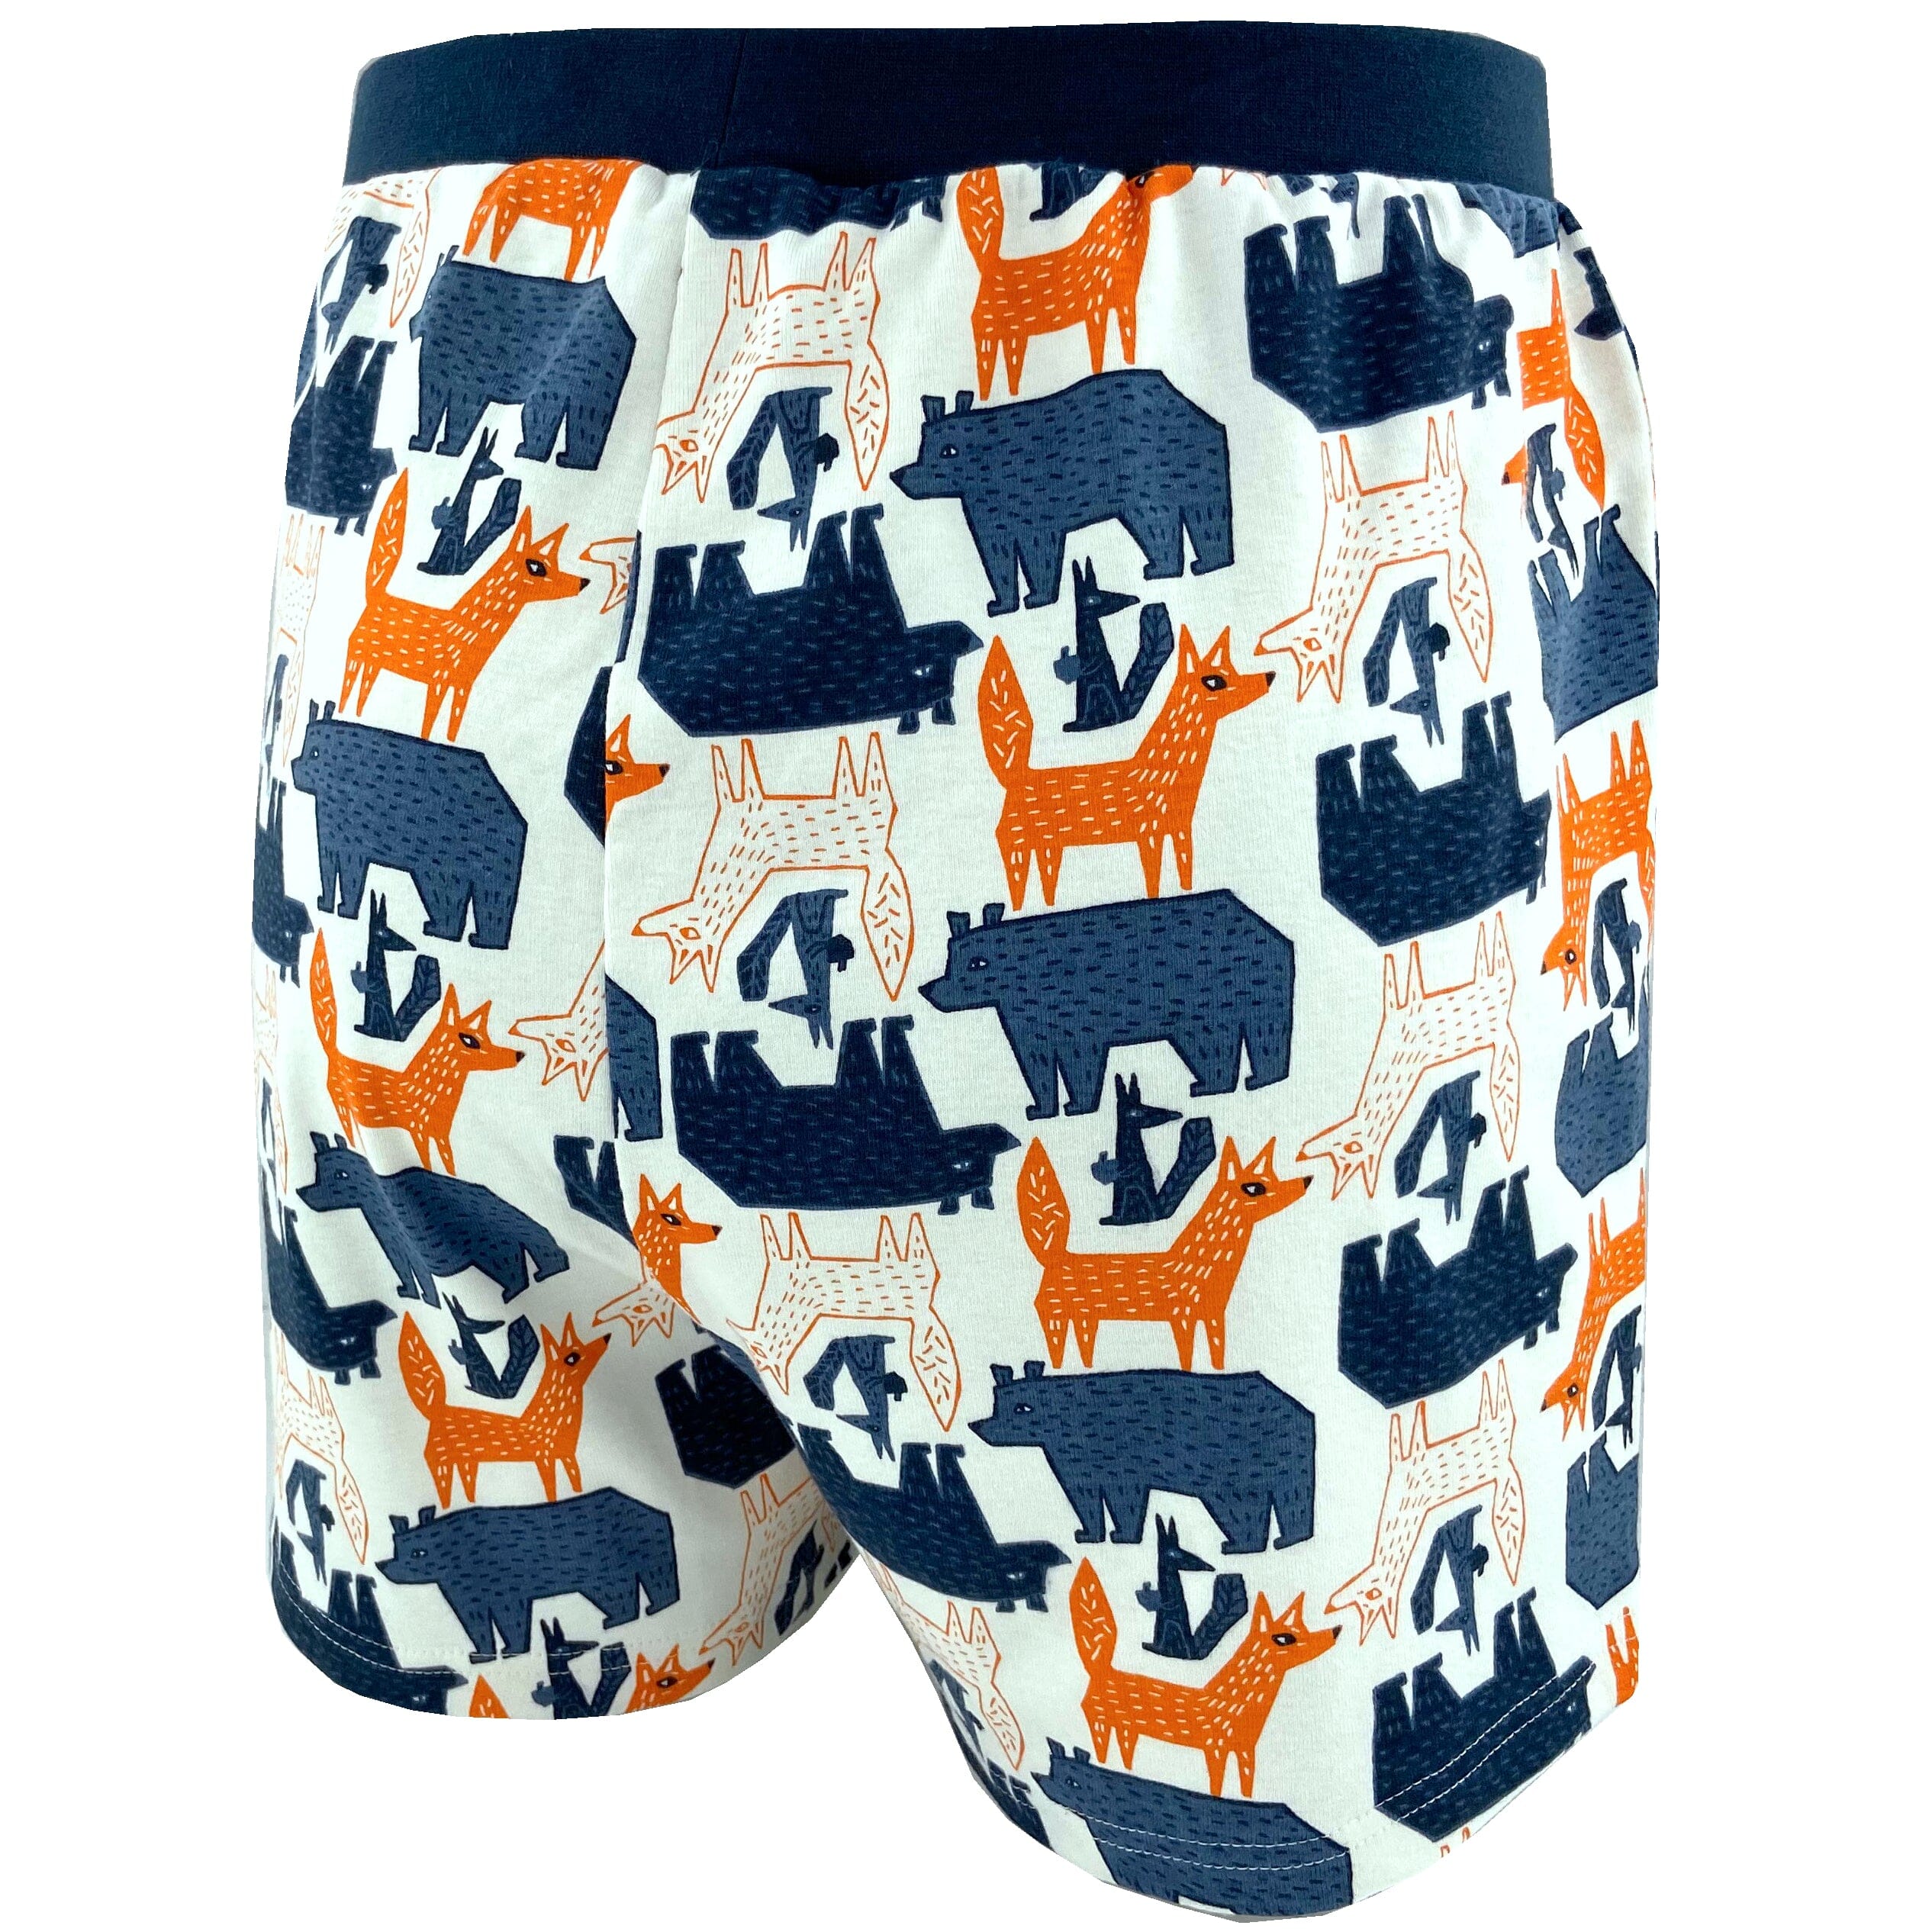 Men's Foxes and Bears All Over Print Cotton Knit Boxer Pajama Shorts